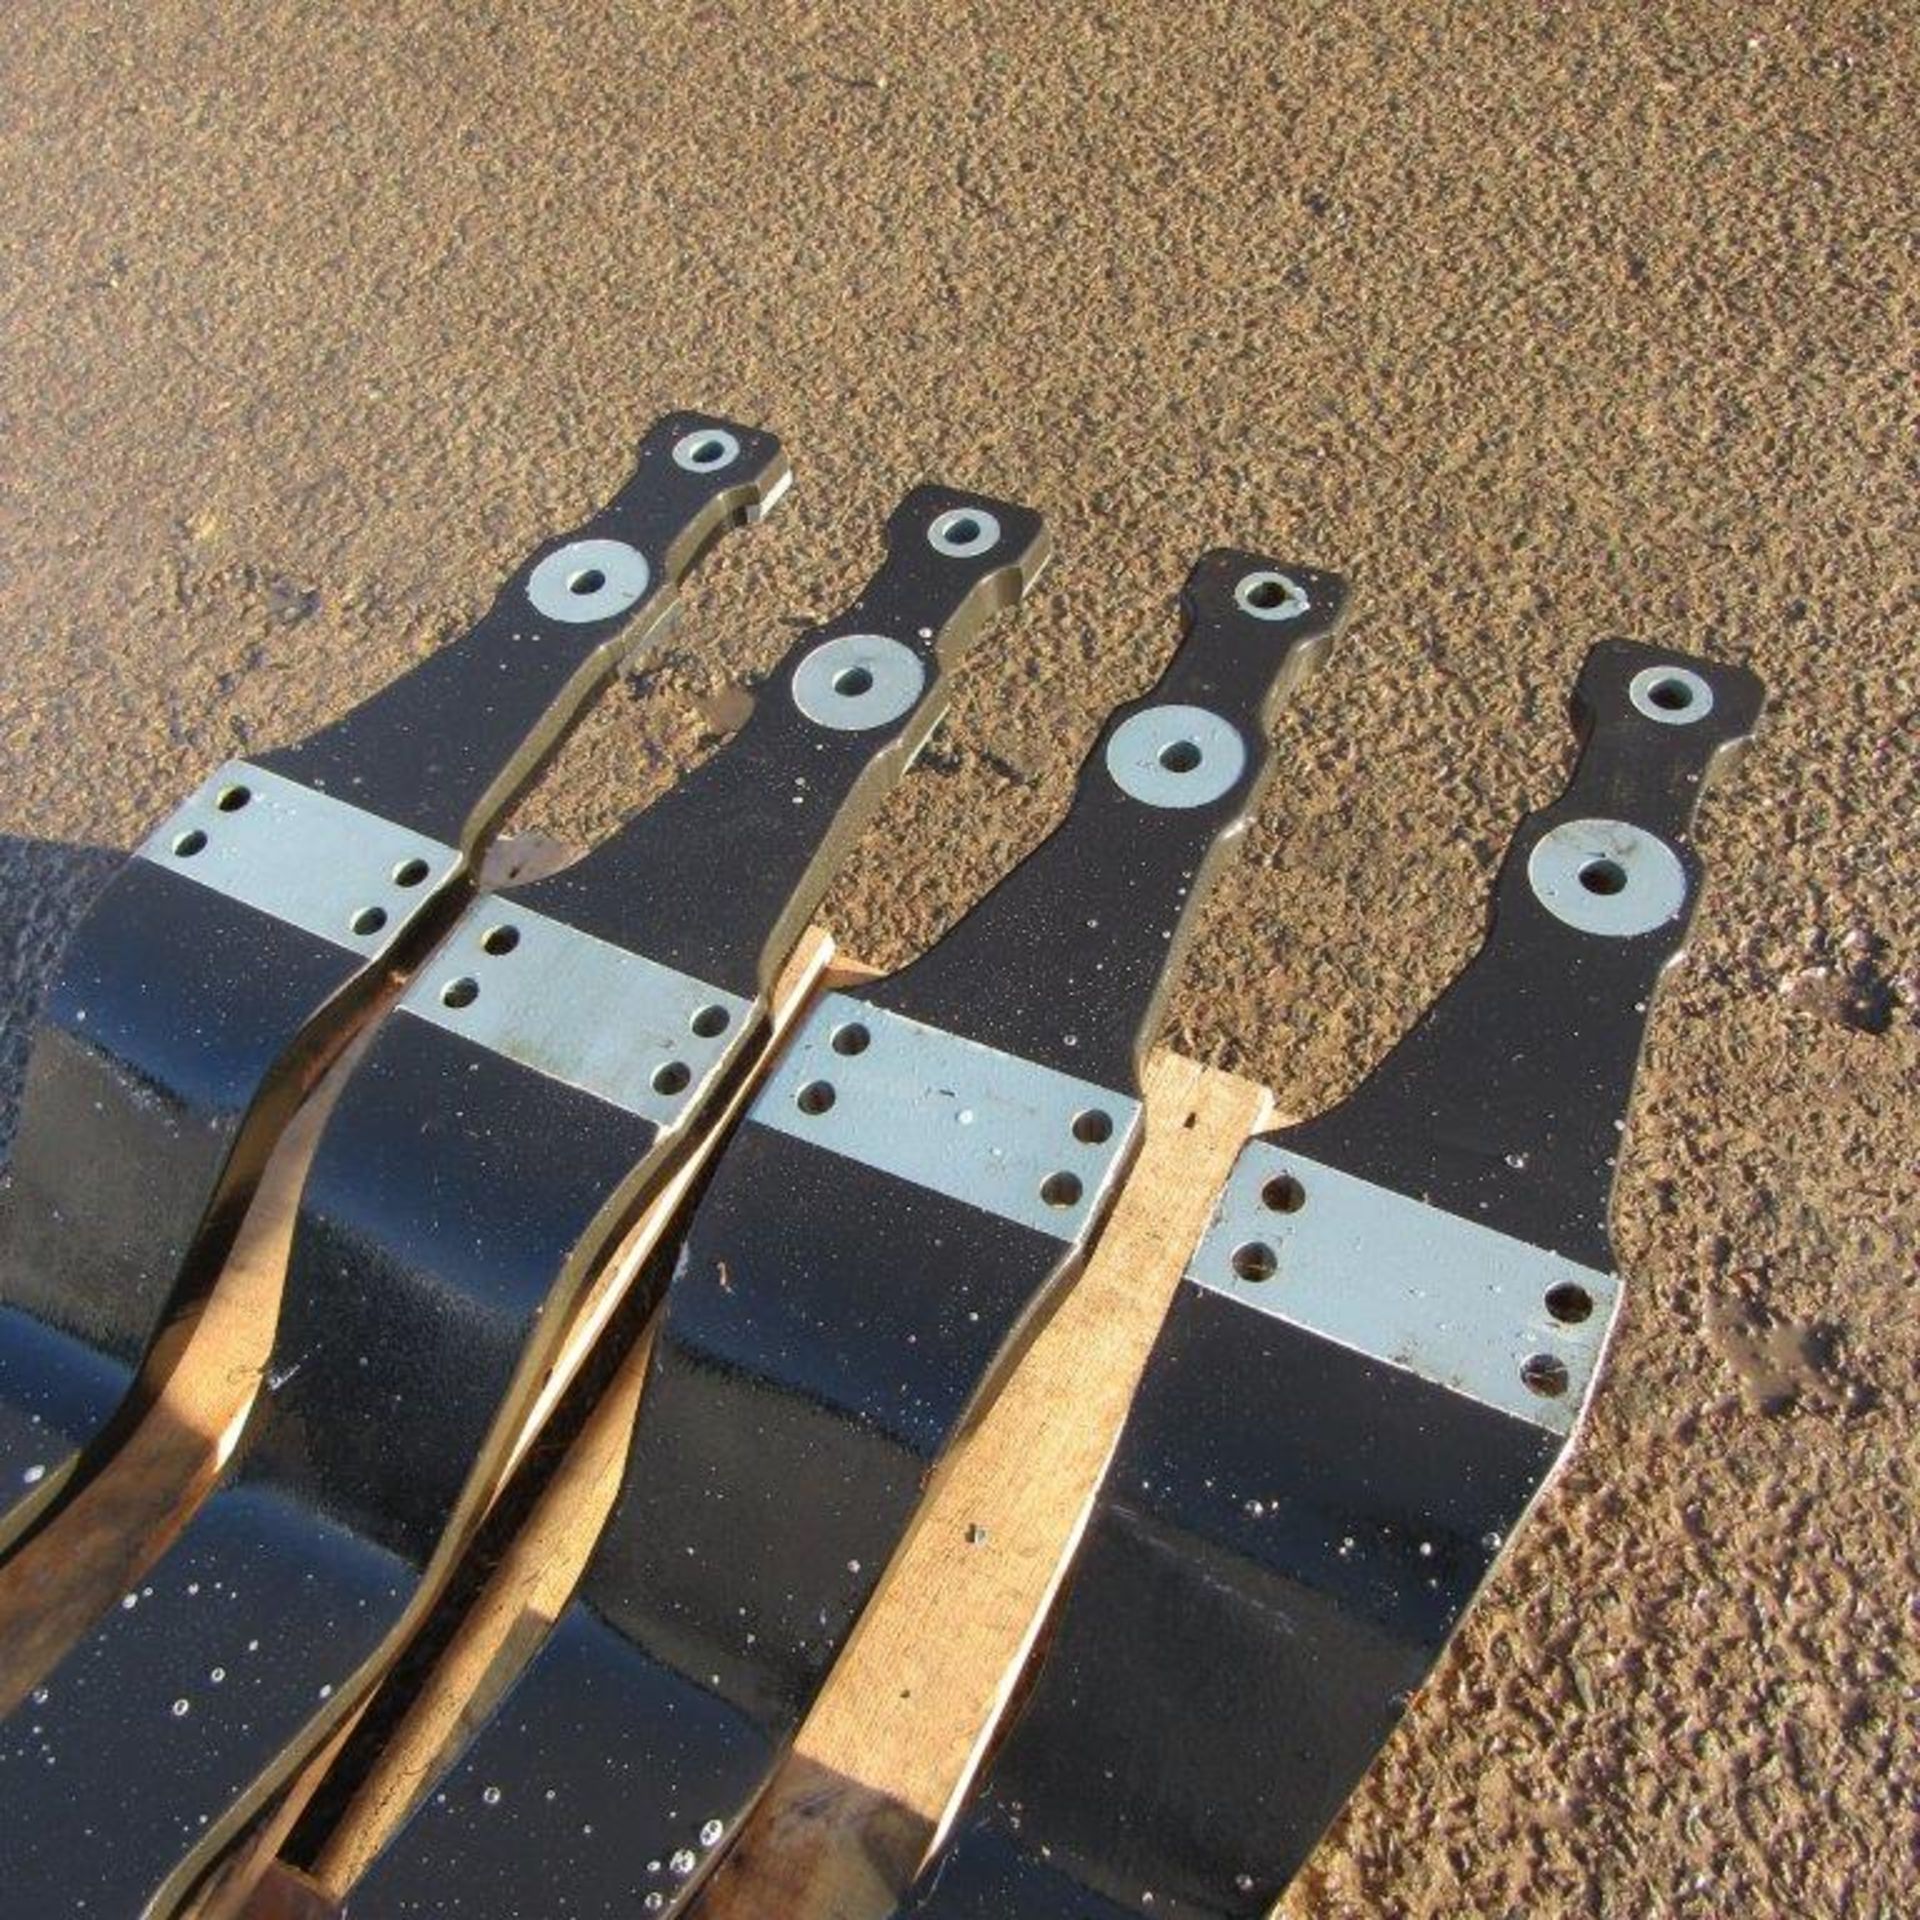 4 x Unissued Hagglunds Leaf Springs - Image 4 of 6